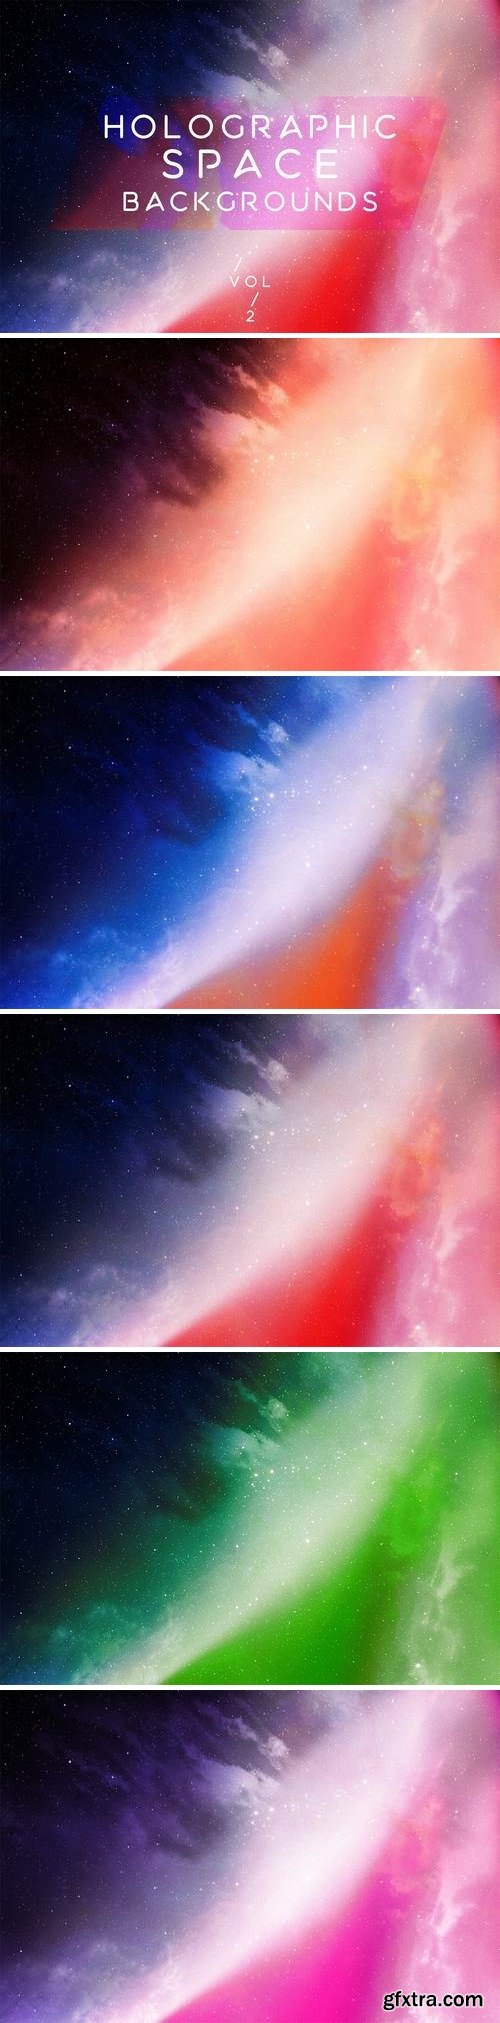 Holographic Space Backgrounds Vol.2